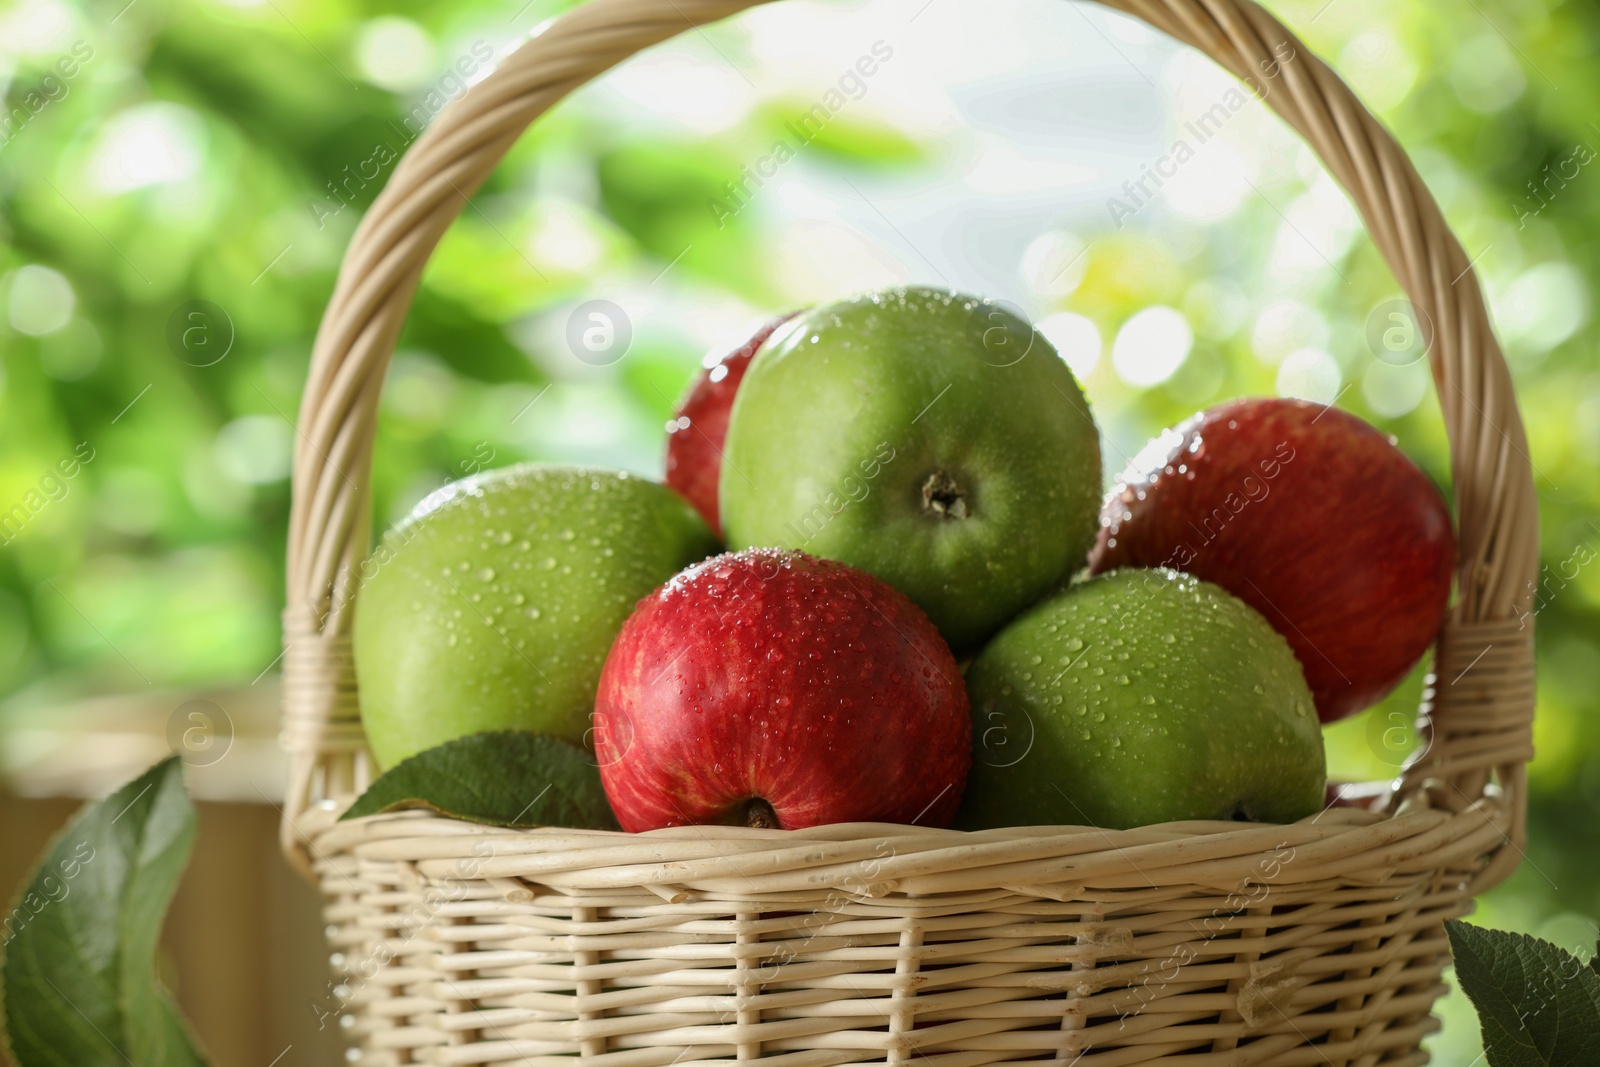 Photo of Different ripe apples with water drops in wicker basket on blurred background, closeup